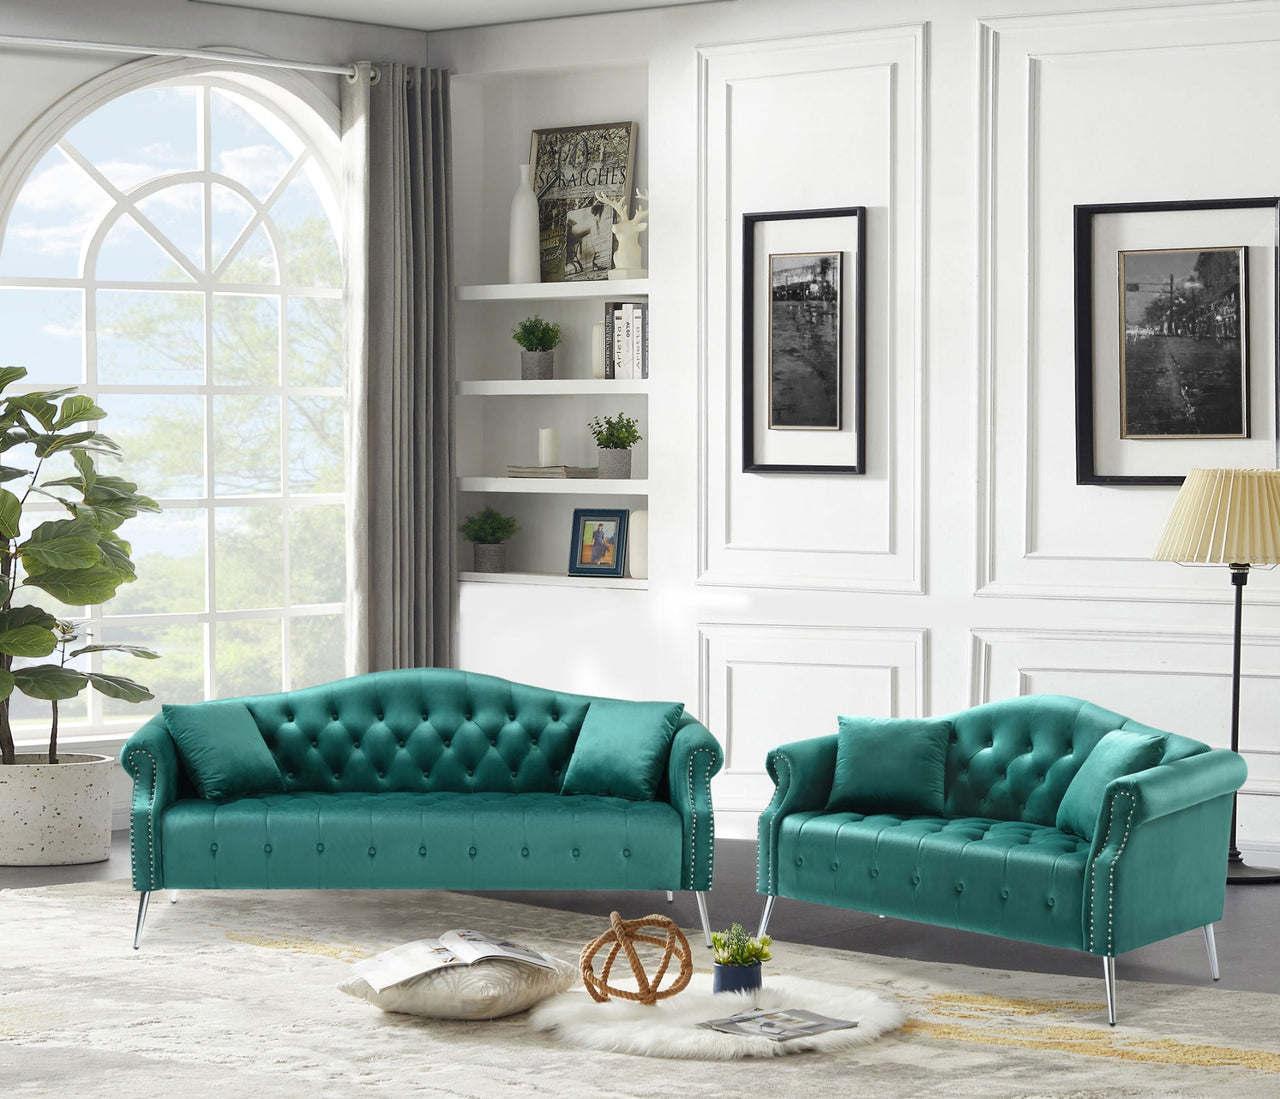 Classic Chesterfield Velvet Sofa Loveseat Contemporary Upholstered Couch Button Tufted Nailhead Trimming Curved Backrest Rolled Arms with Silver Metal Legs Living Room Set; 4 Pillows Included; Green - Casatrail.com